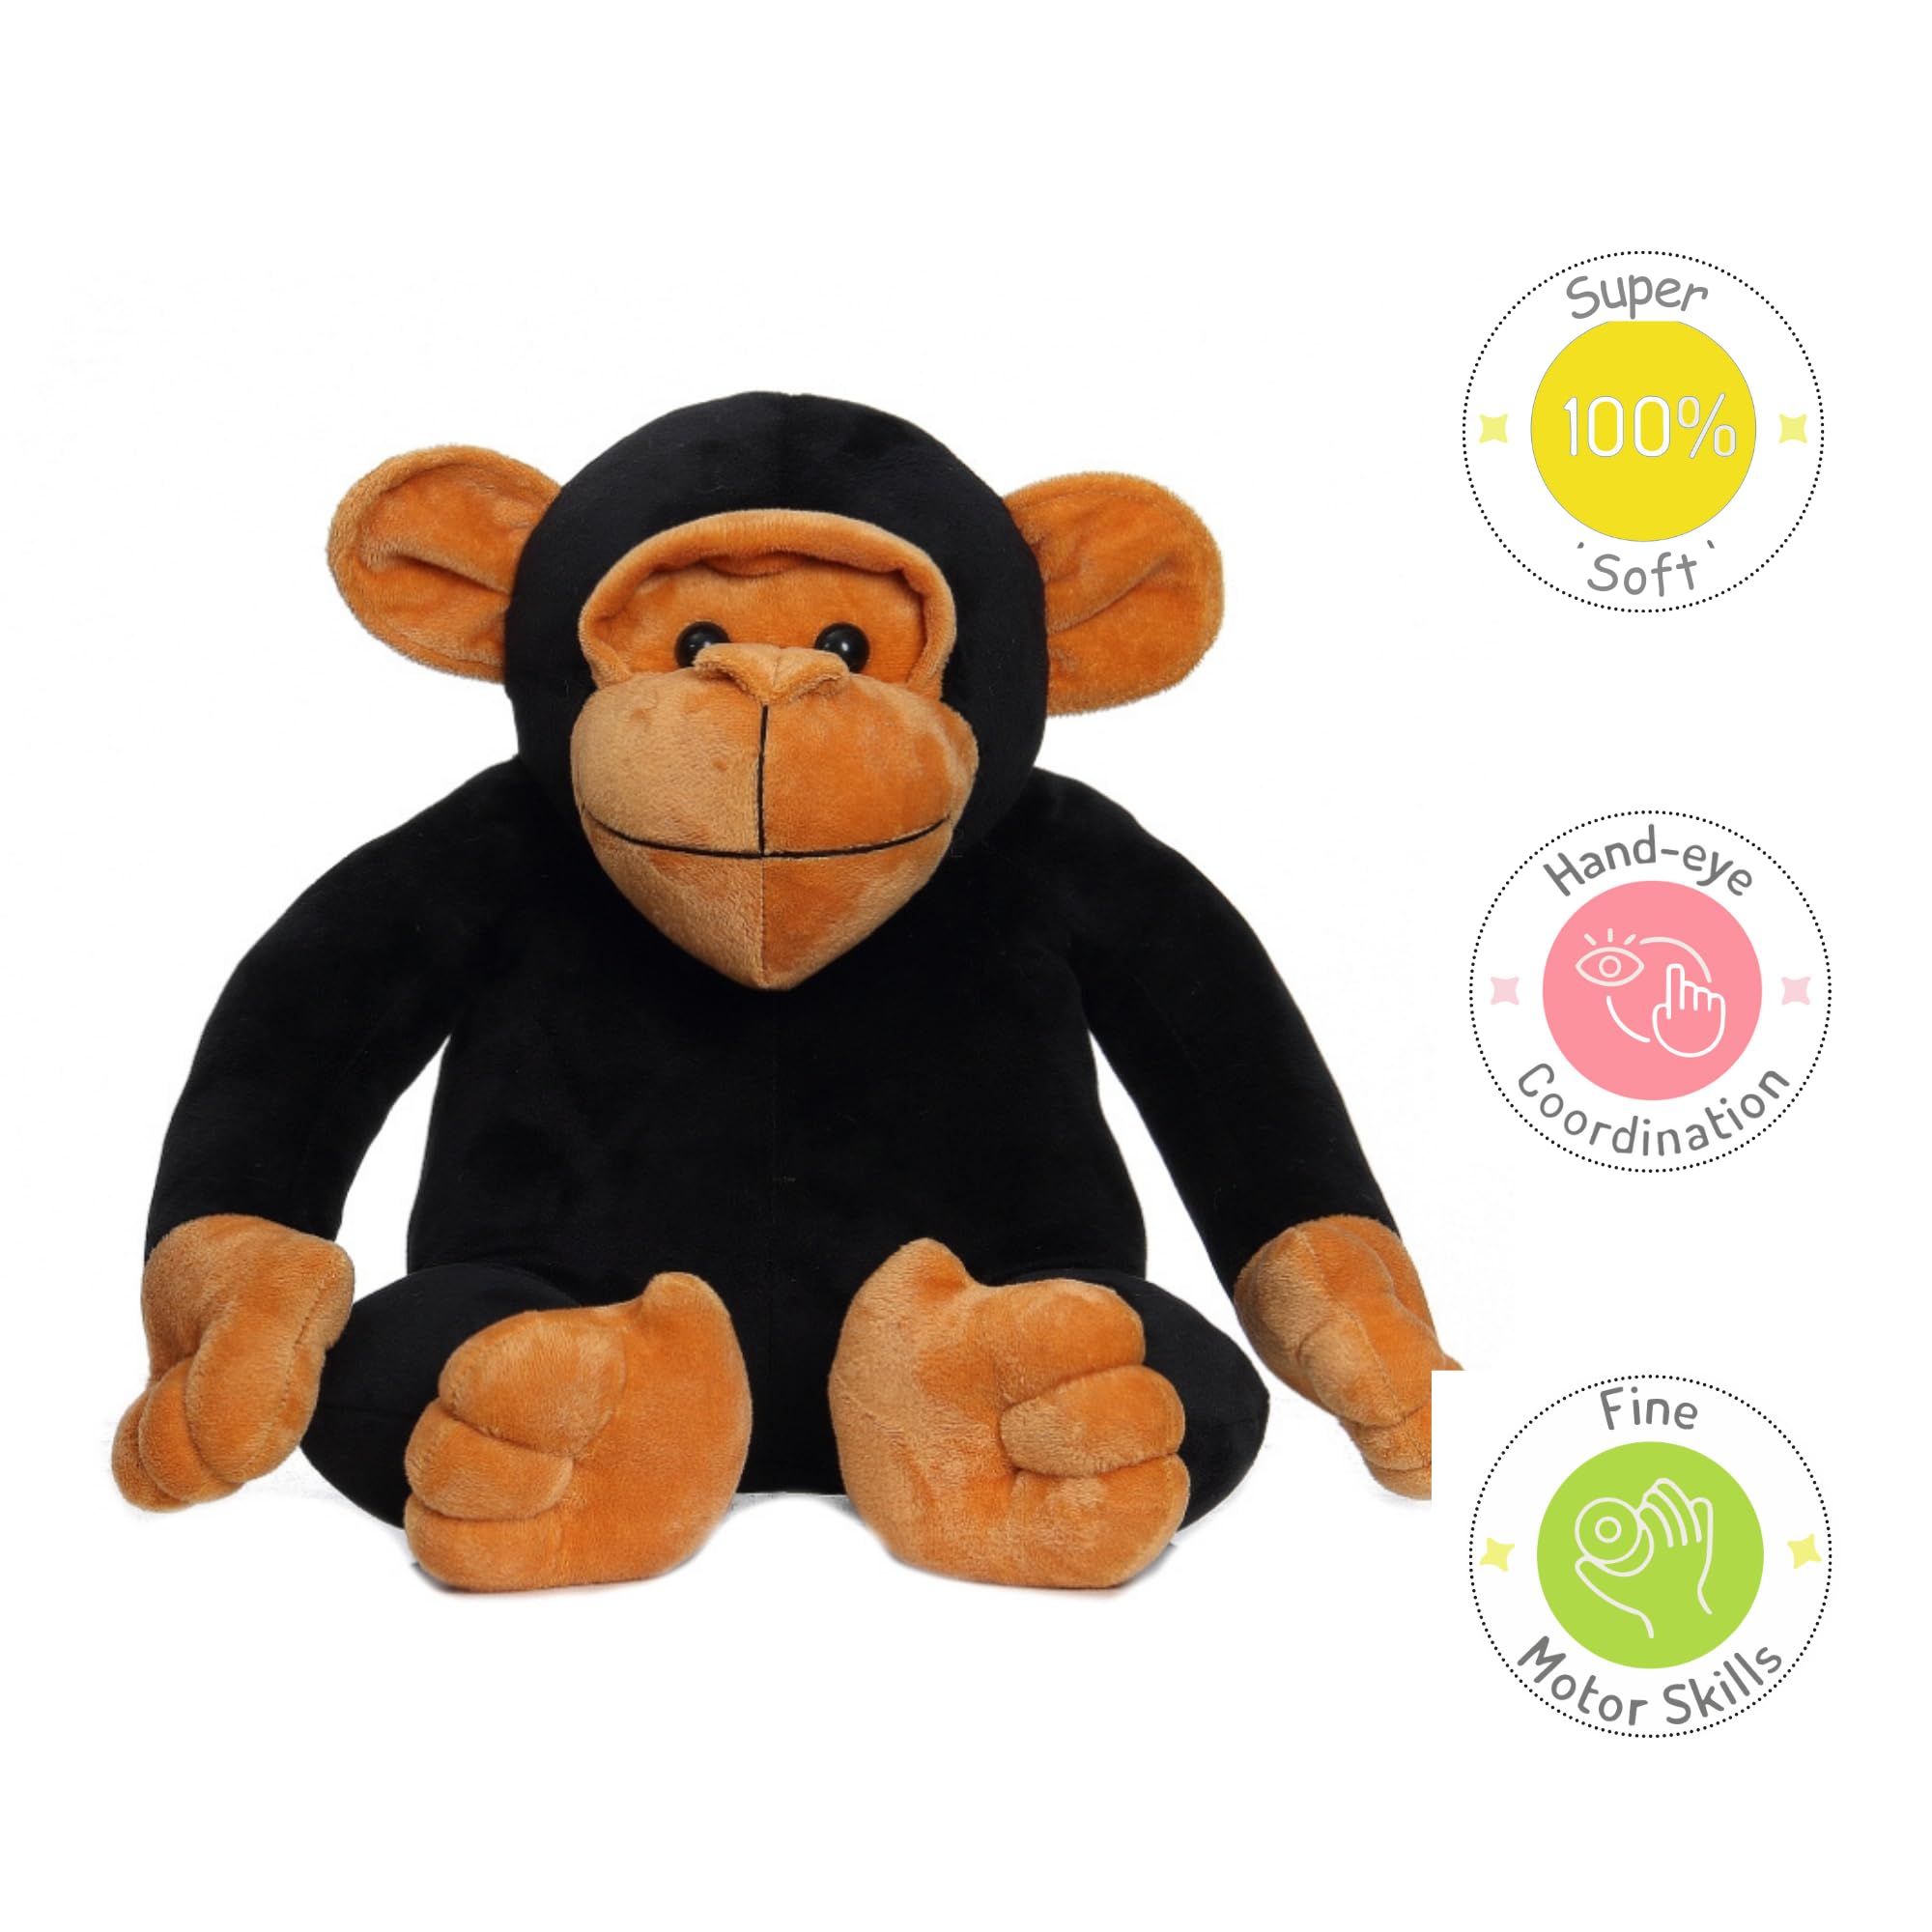 Kong Monkey Plush Toy, Cute and Huggable Animal Stuffed Toy, Soft and Cuddly for Kids, Boys, and Girls - Best Birthday Gift Idea - 30 cm